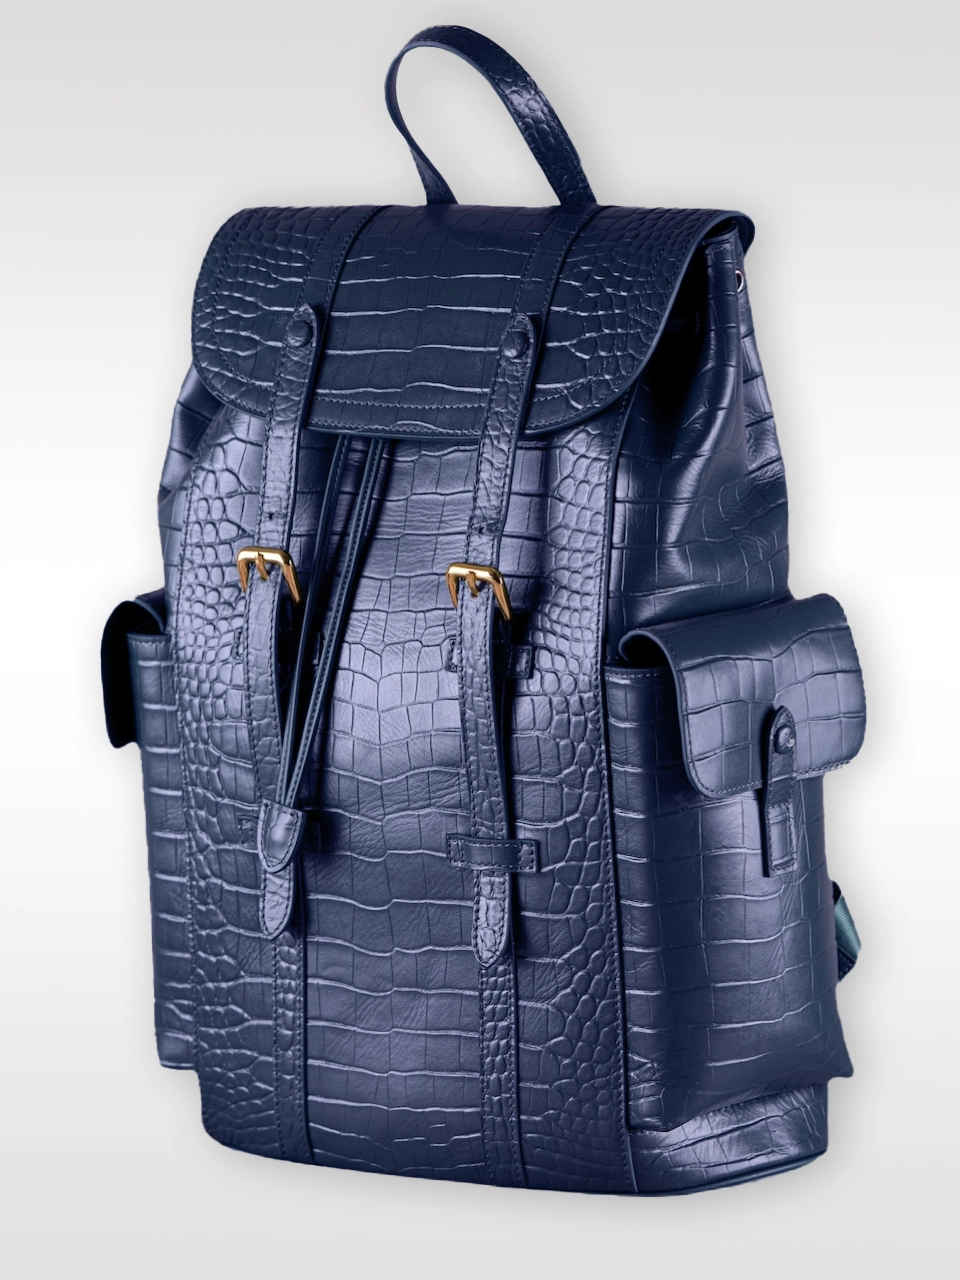 The world's most expensive backpack - Louis Vuitton Crocodilian